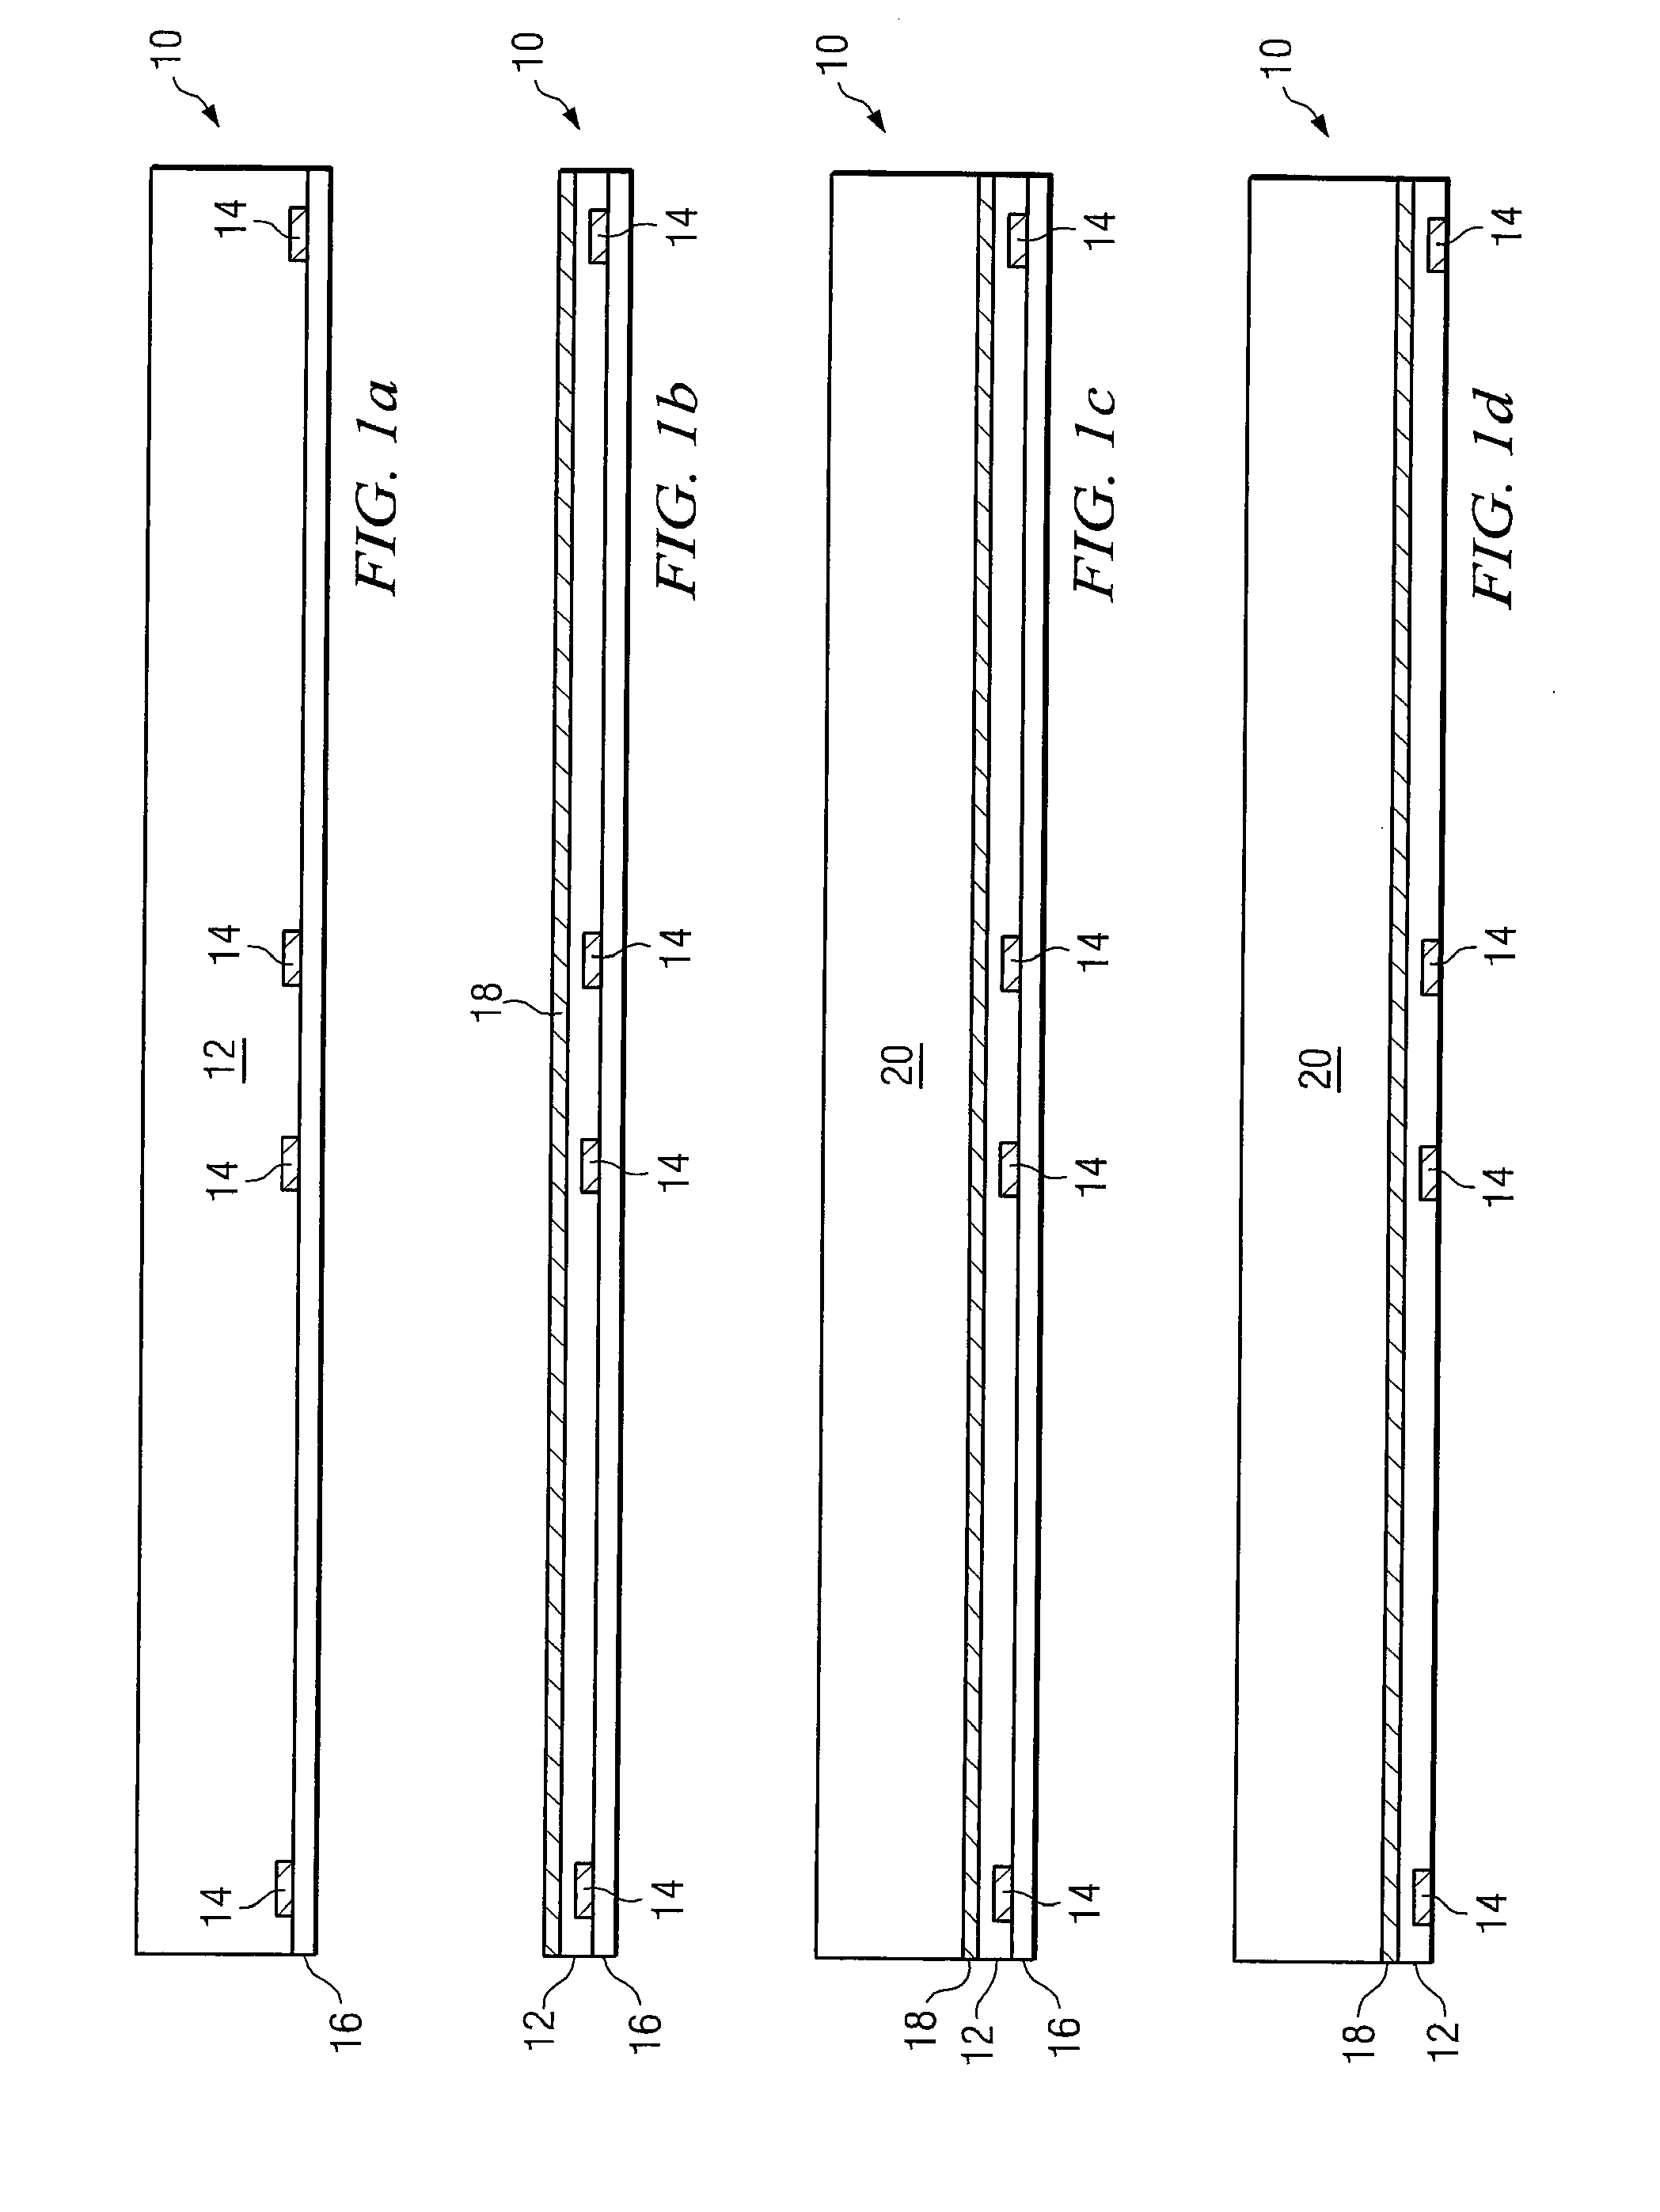 Semiconductor Package and Method of Reducing Electromagnetic Interference Between Devices